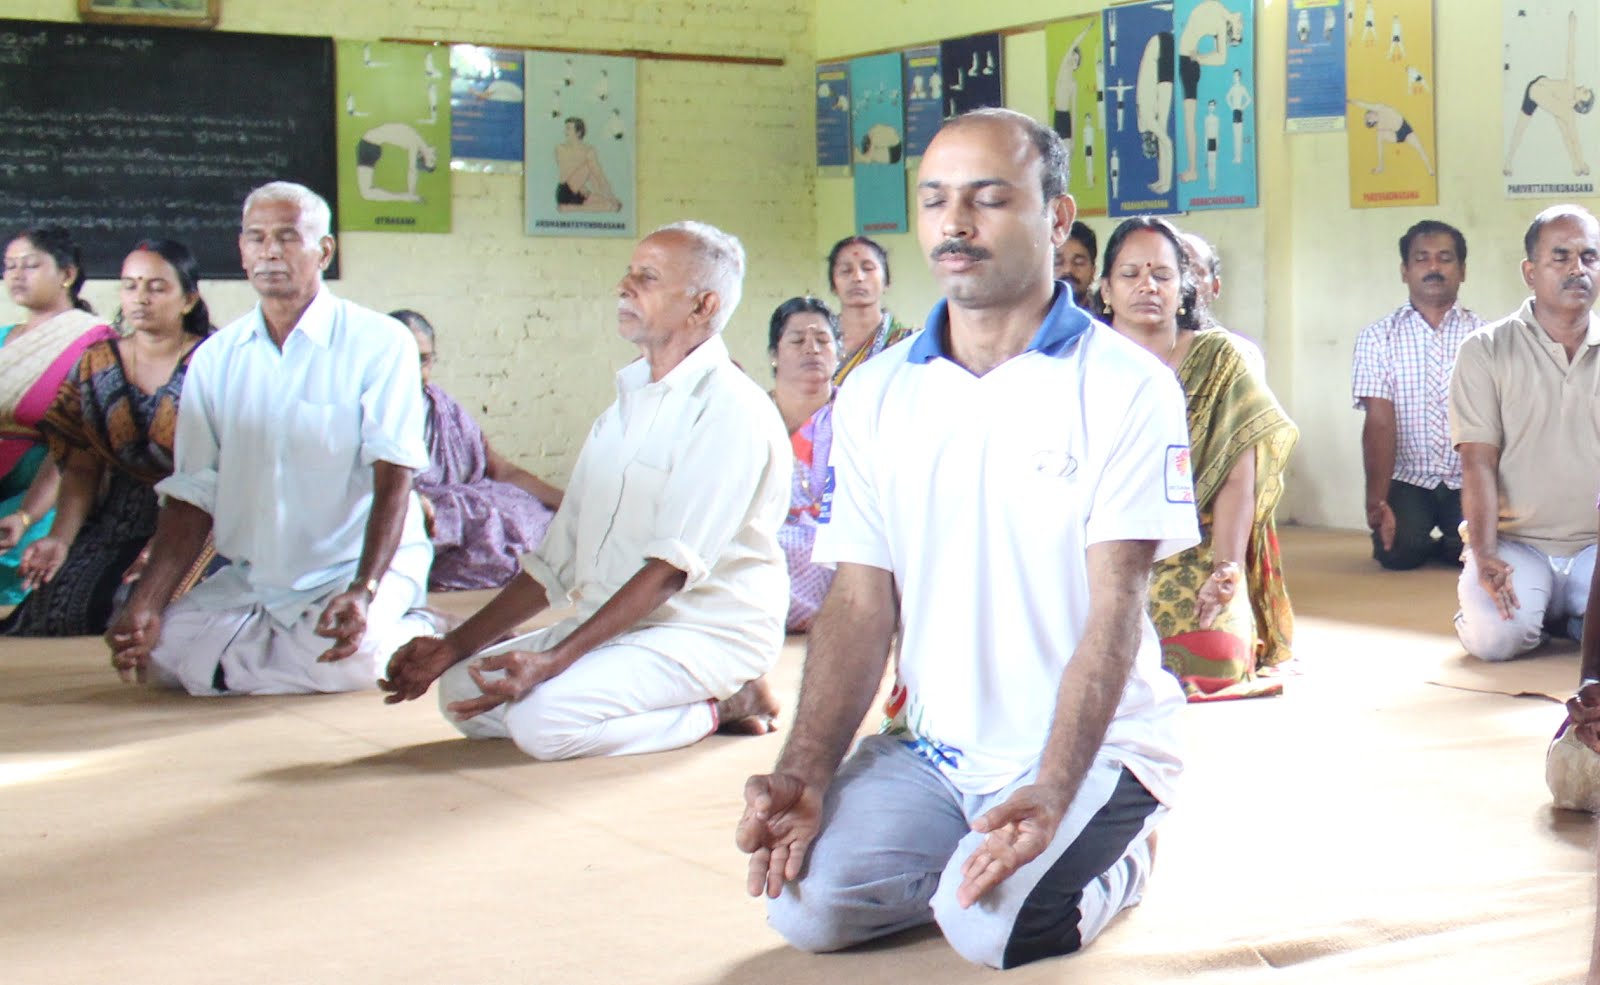 YOGA for Harmony and Peace - ‘യോഗ’